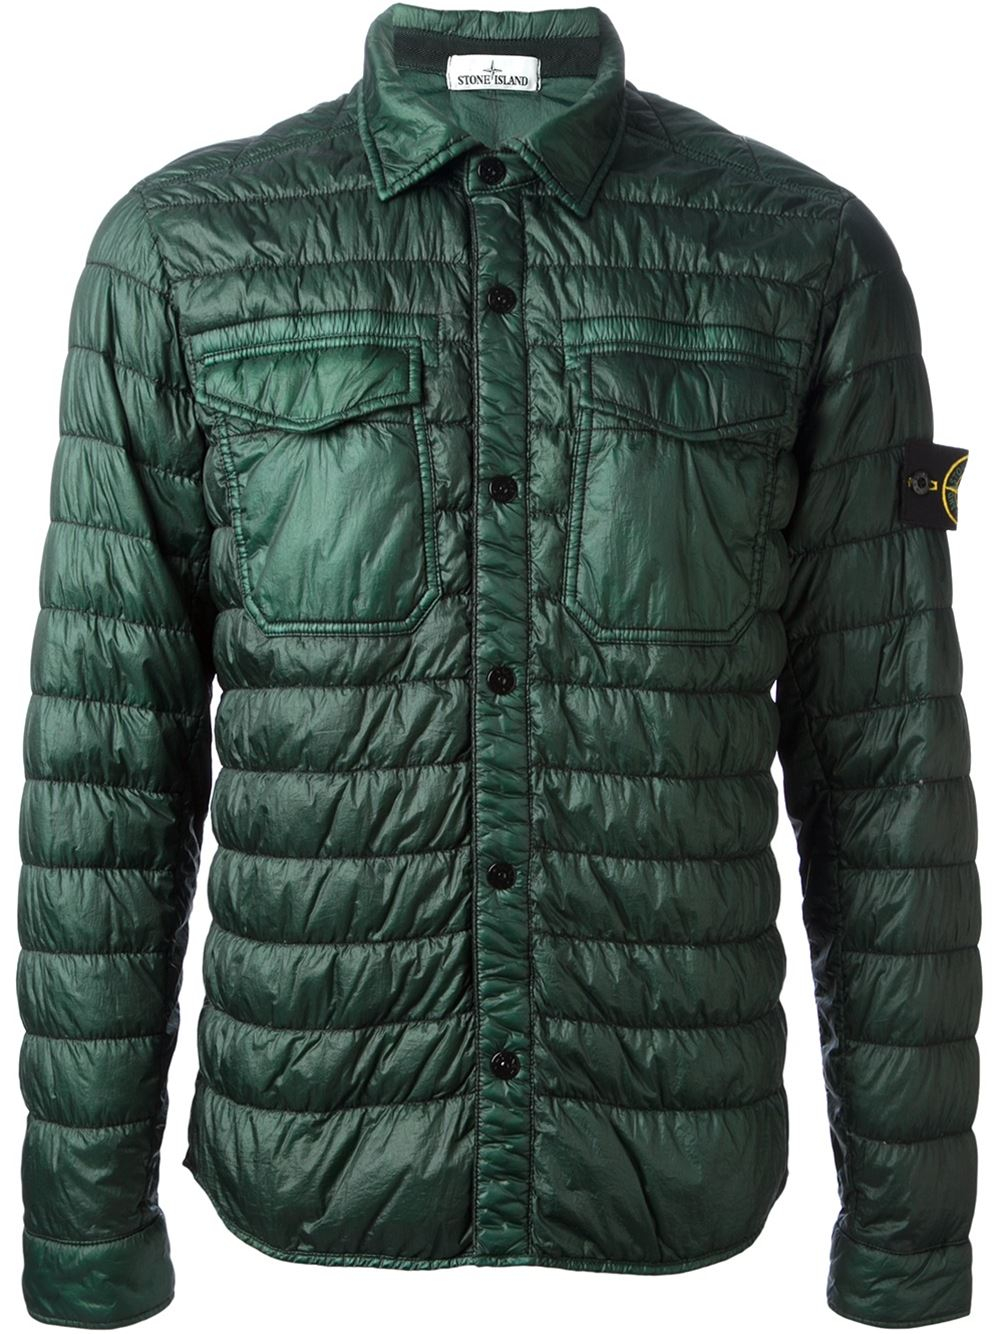 Stone Island Padded Shirt Jacket in Green for Men - Lyst